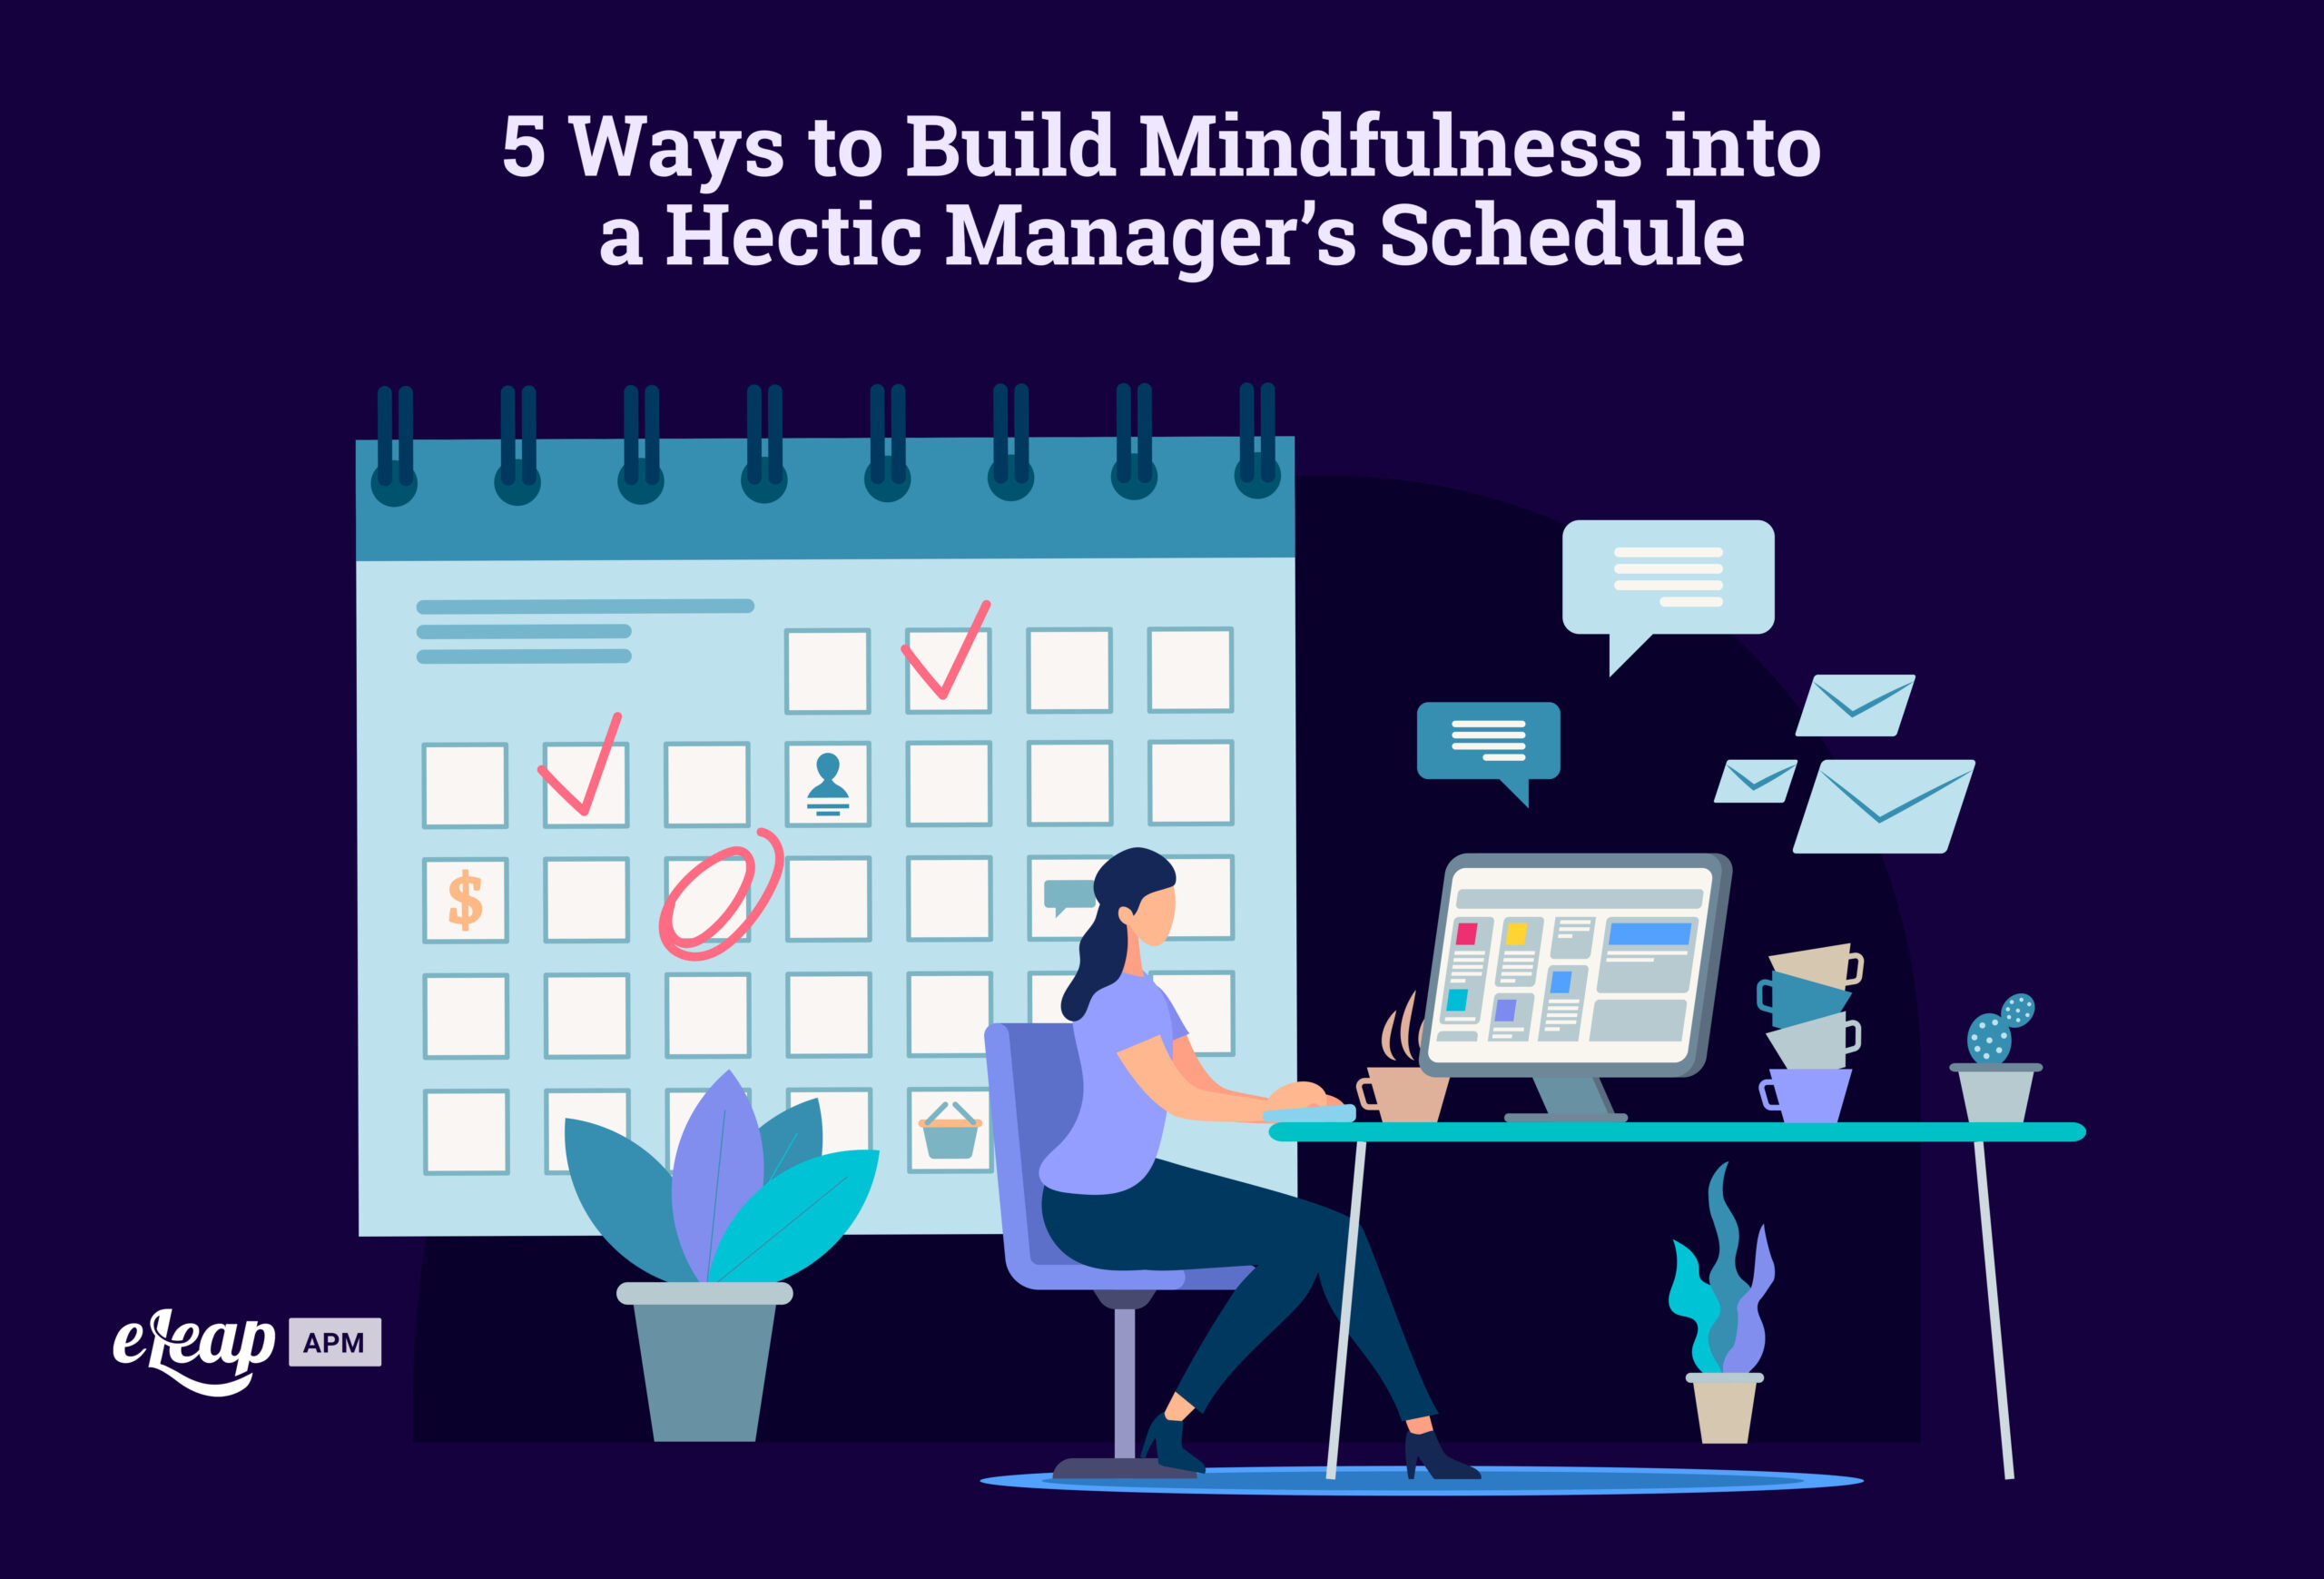 5 Ways to Build Mindfulness into a Hectic Manager’s Schedule